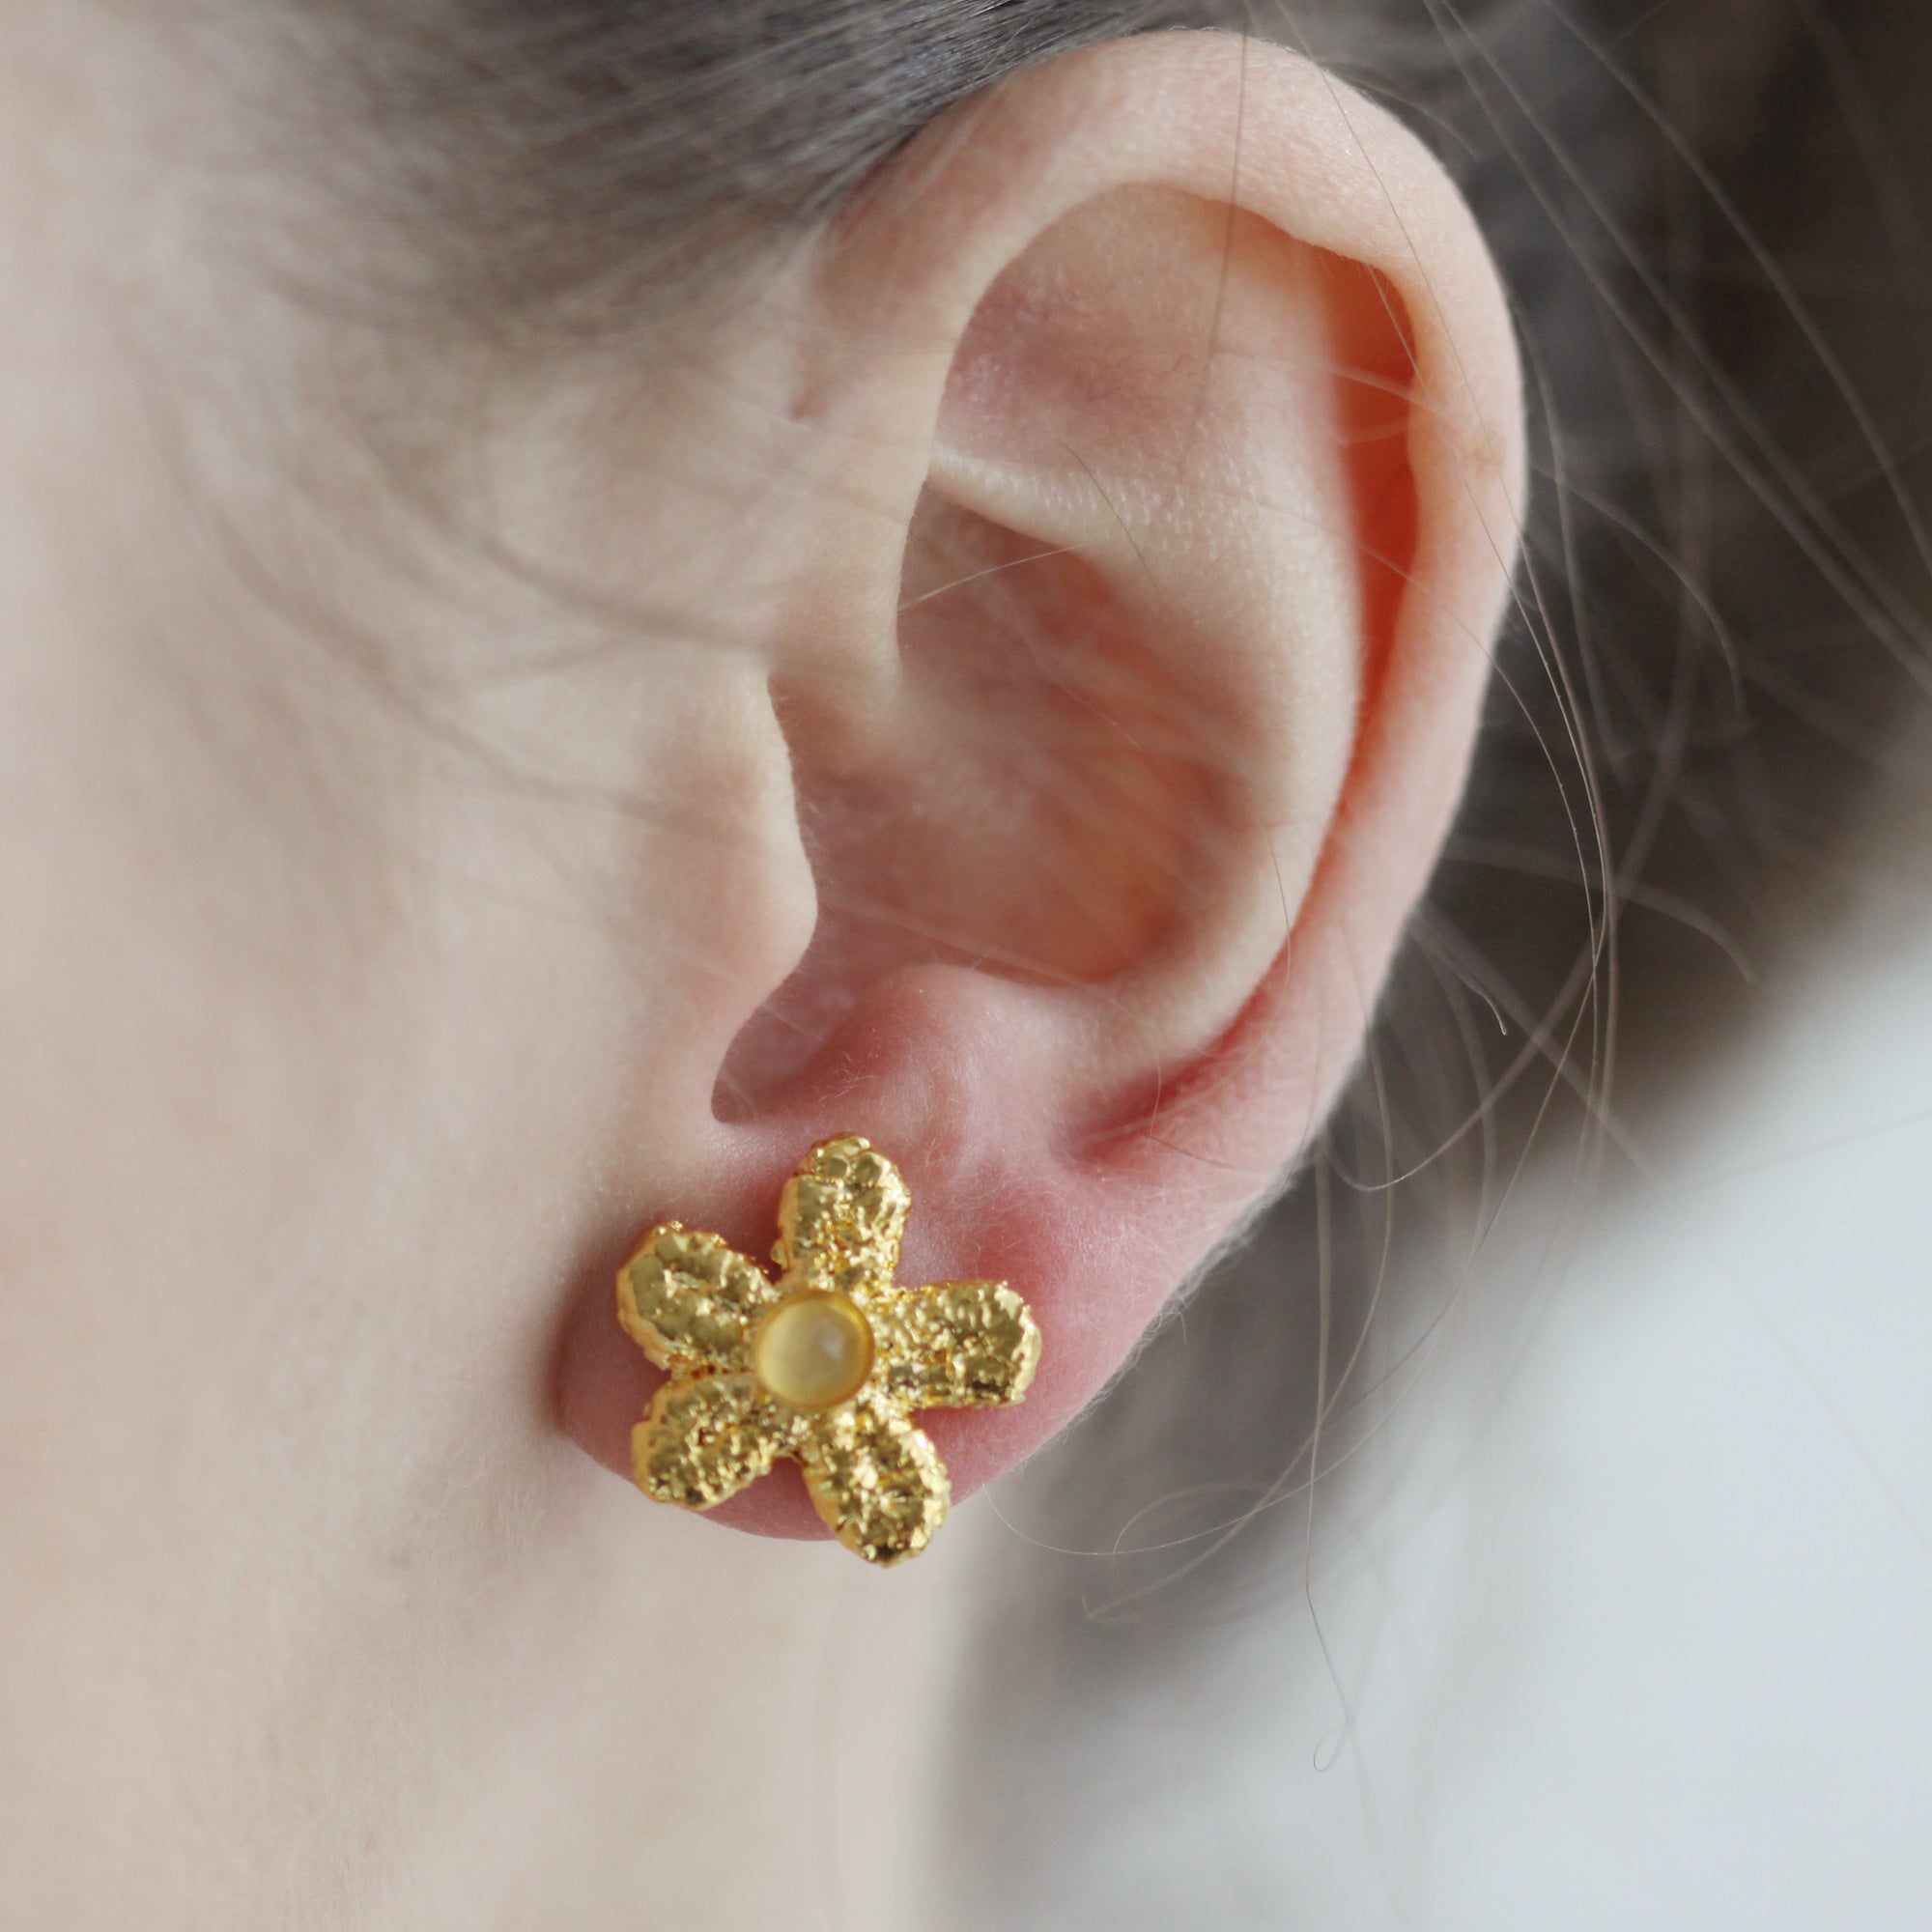 Fae lace stud flower earrings in 24k gold with faceted Moonstones.